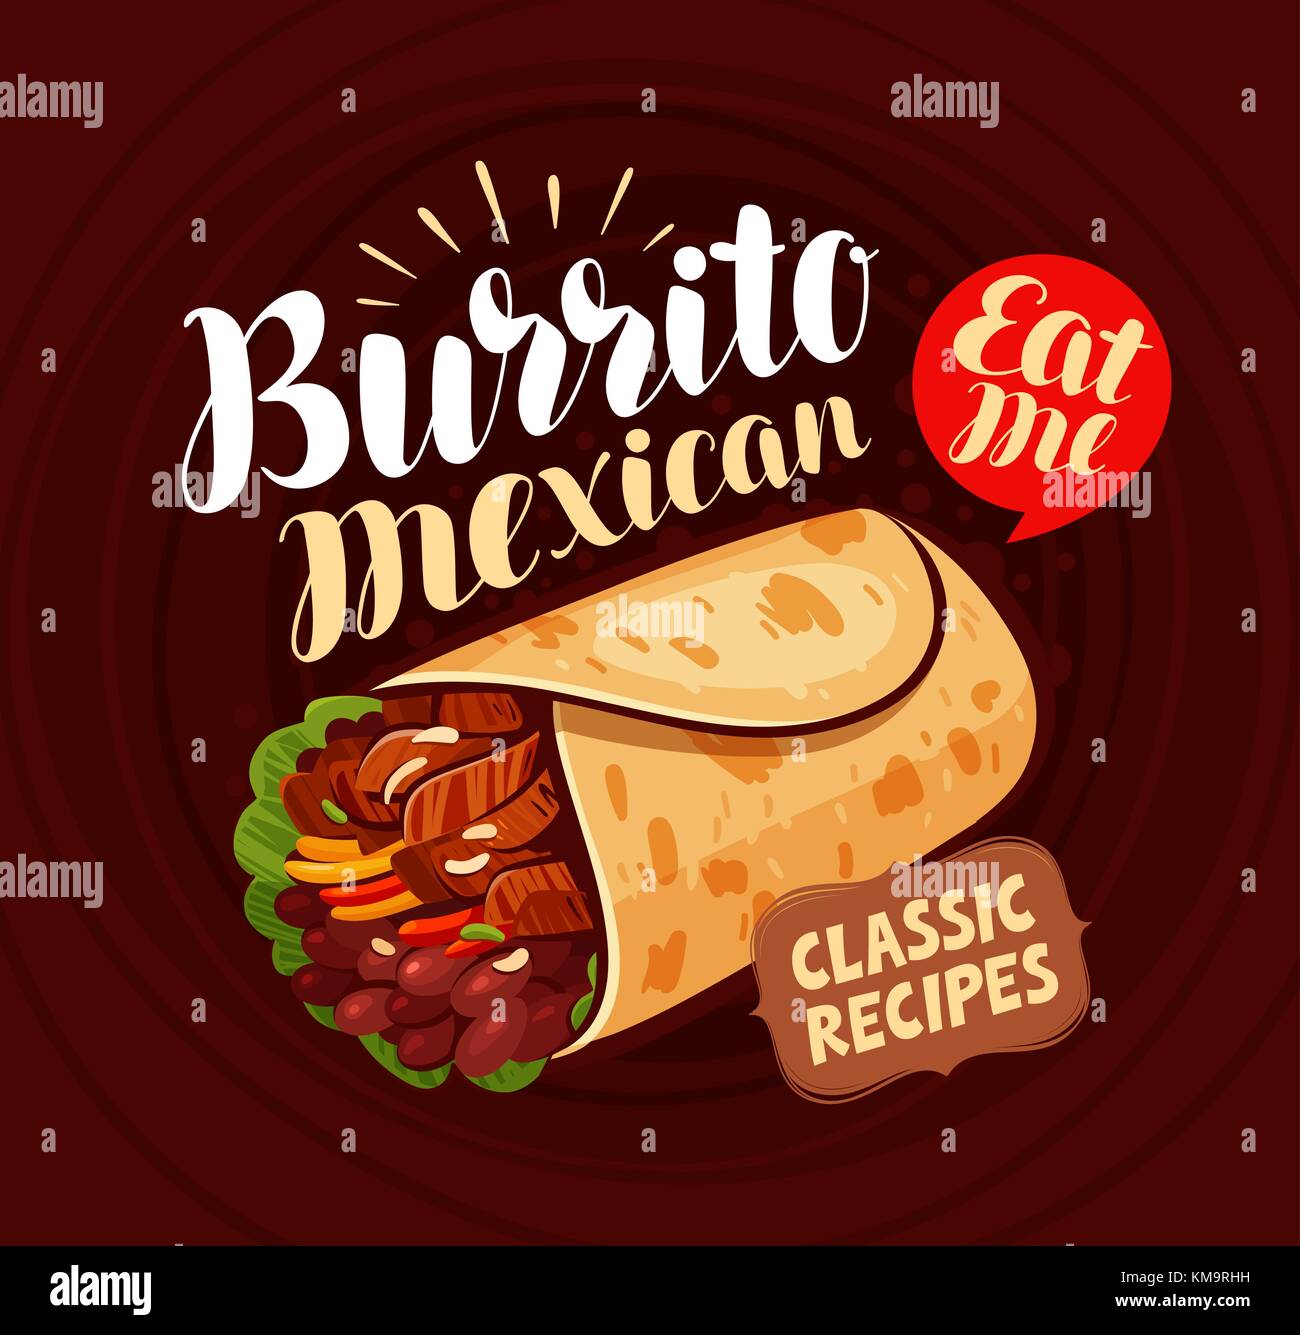 Mexican food, banner. Burrito, kebab, meal, eating concept. Lettering vector illustration Stock Vector